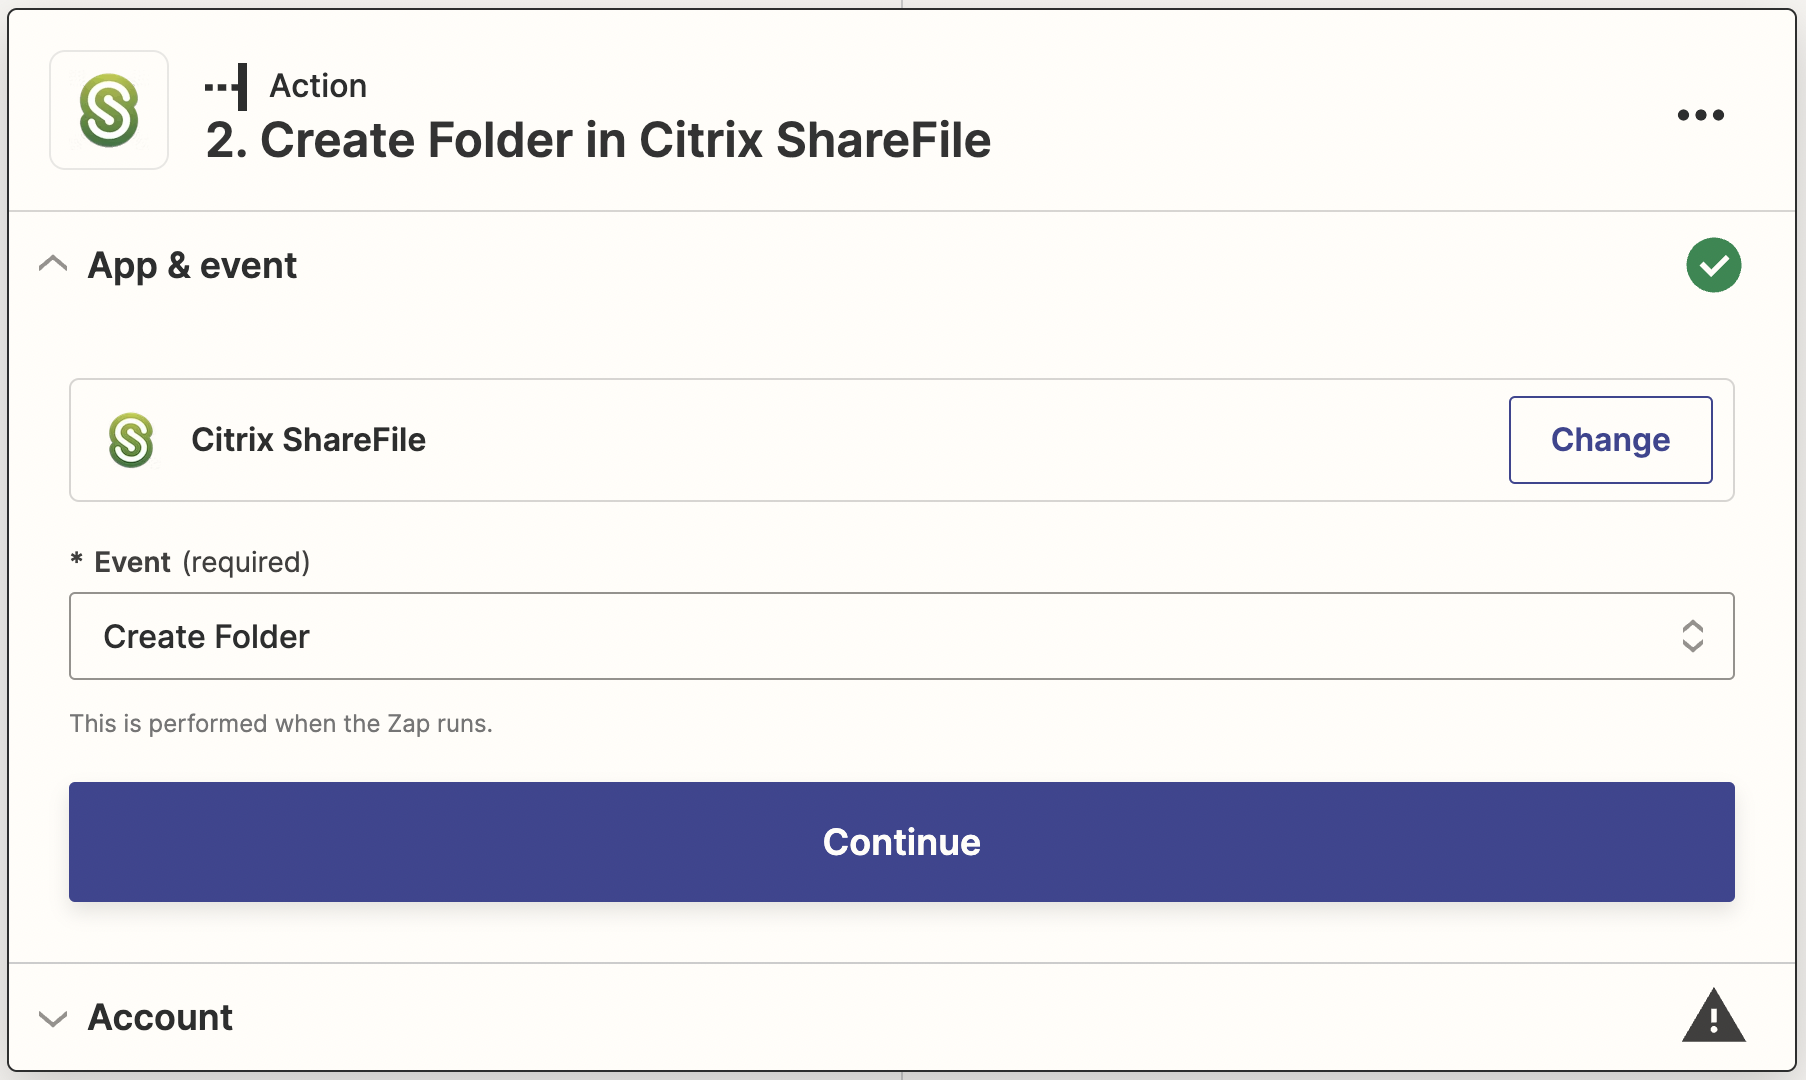 sharefile and financial cents integration through zapier step 3